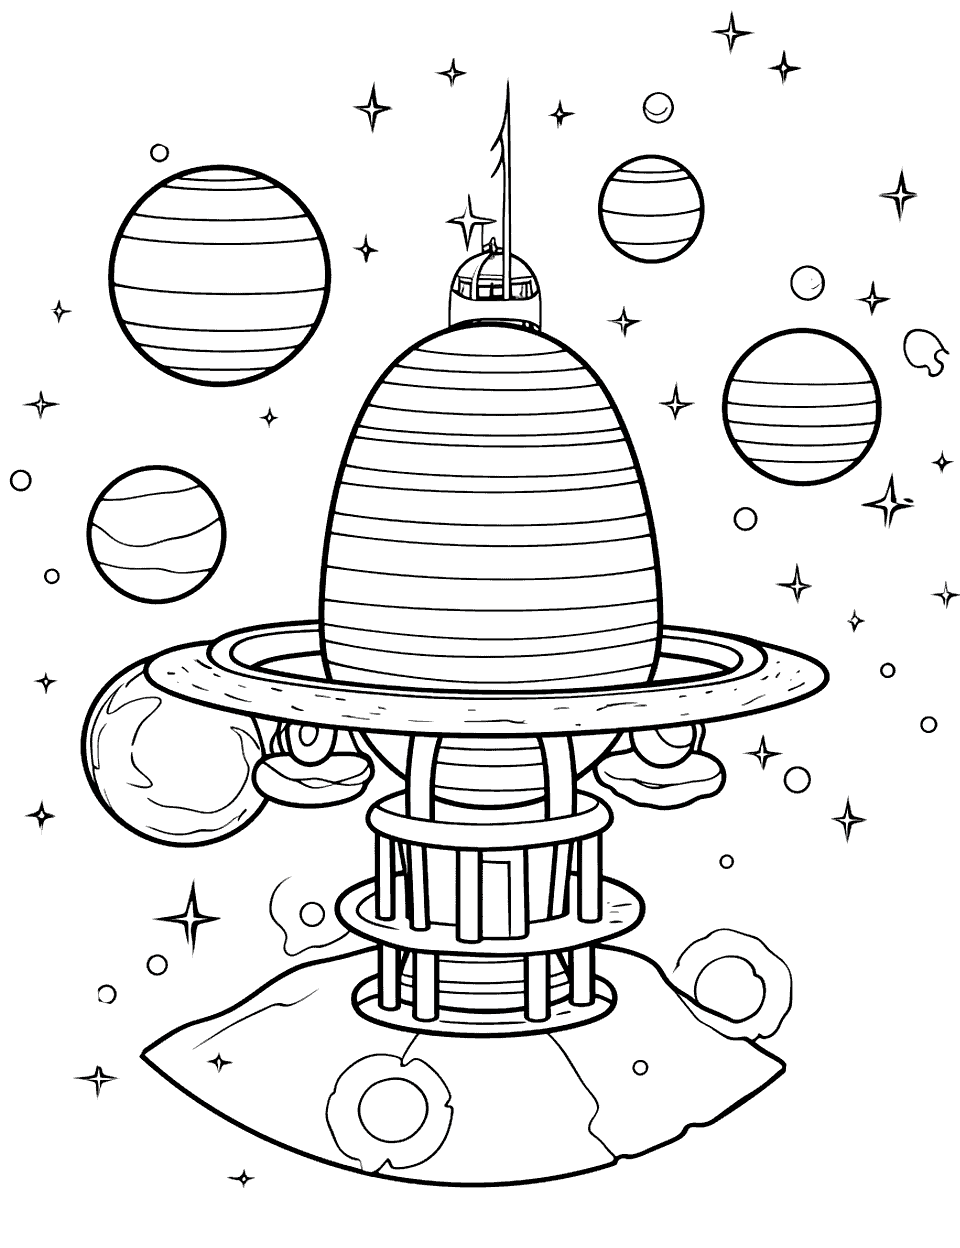 Space Observatory Solar System Coloring Page - A space observatory satellite with planets in the background.